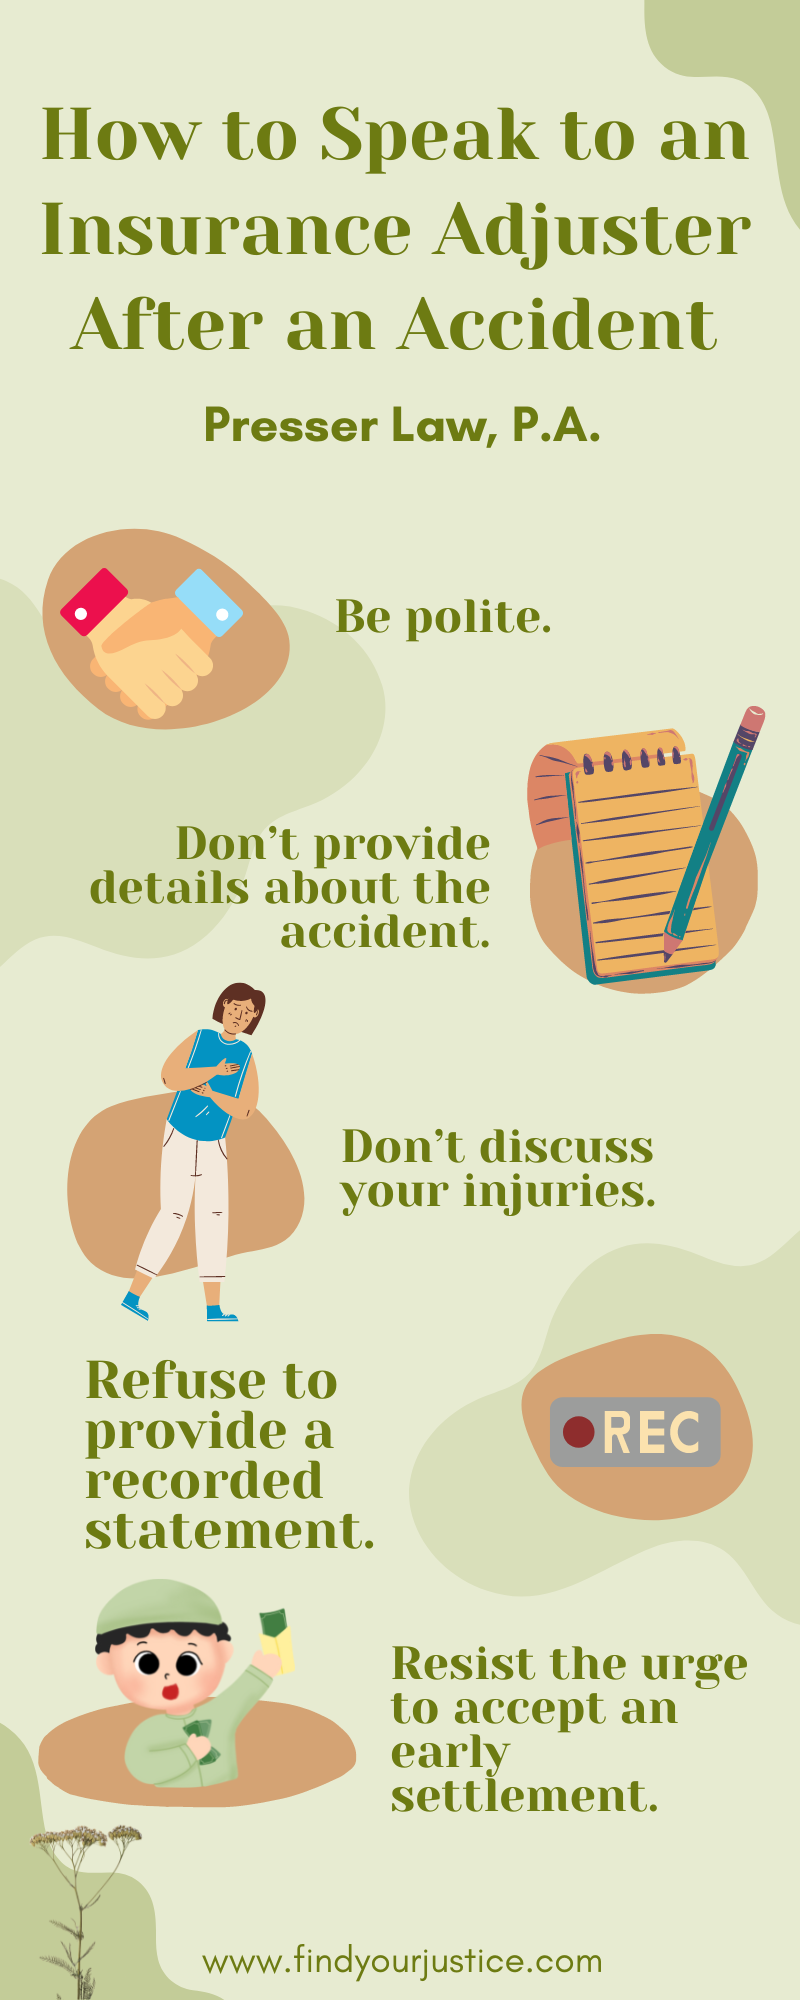 How to Speak to an Insurance Adjuster After an Accident infographic